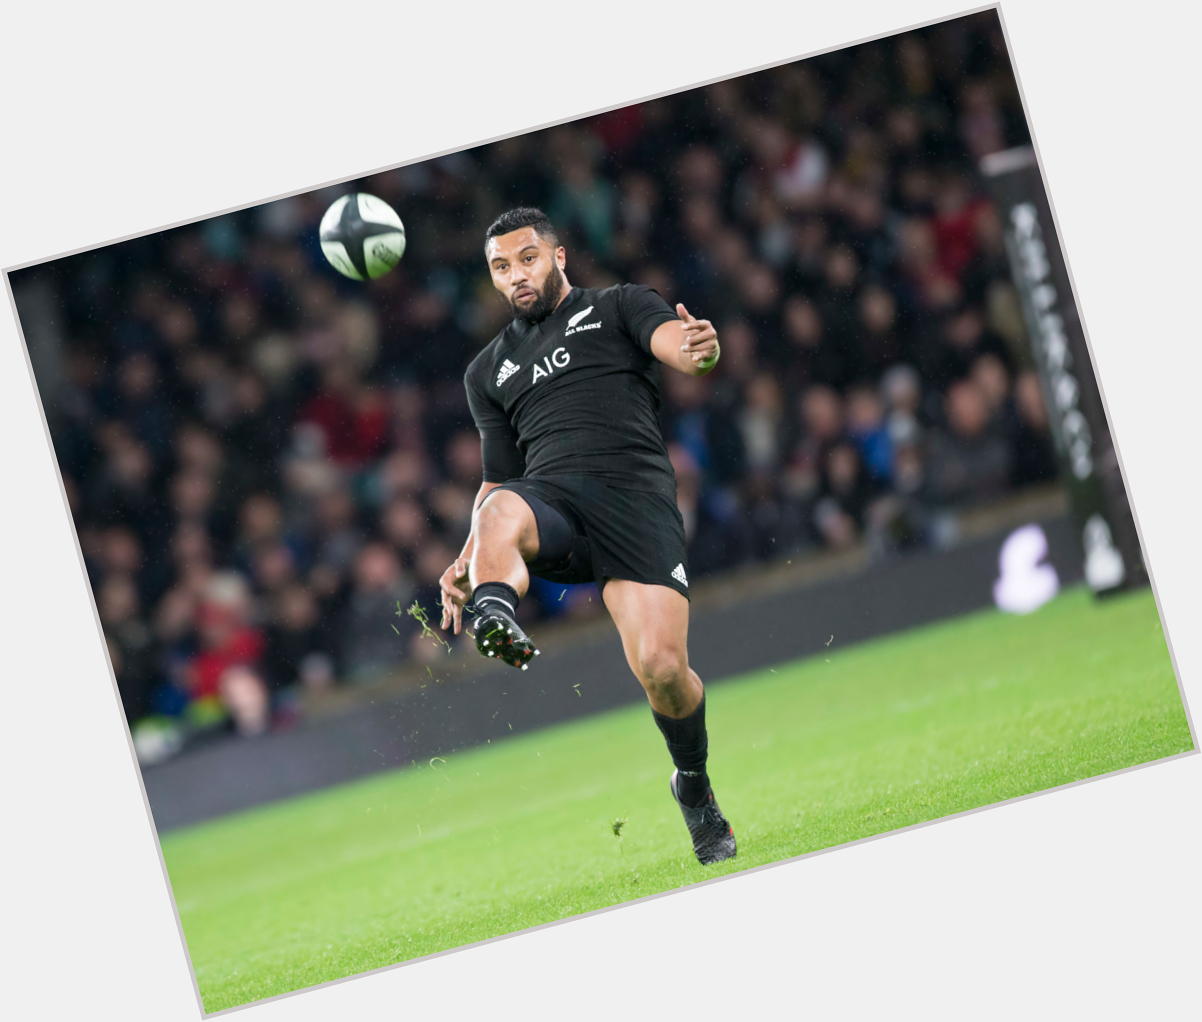  Happy 30th birthday to former All Blacks fly-half and current Wasps playmaker Lima Sopoaga! 